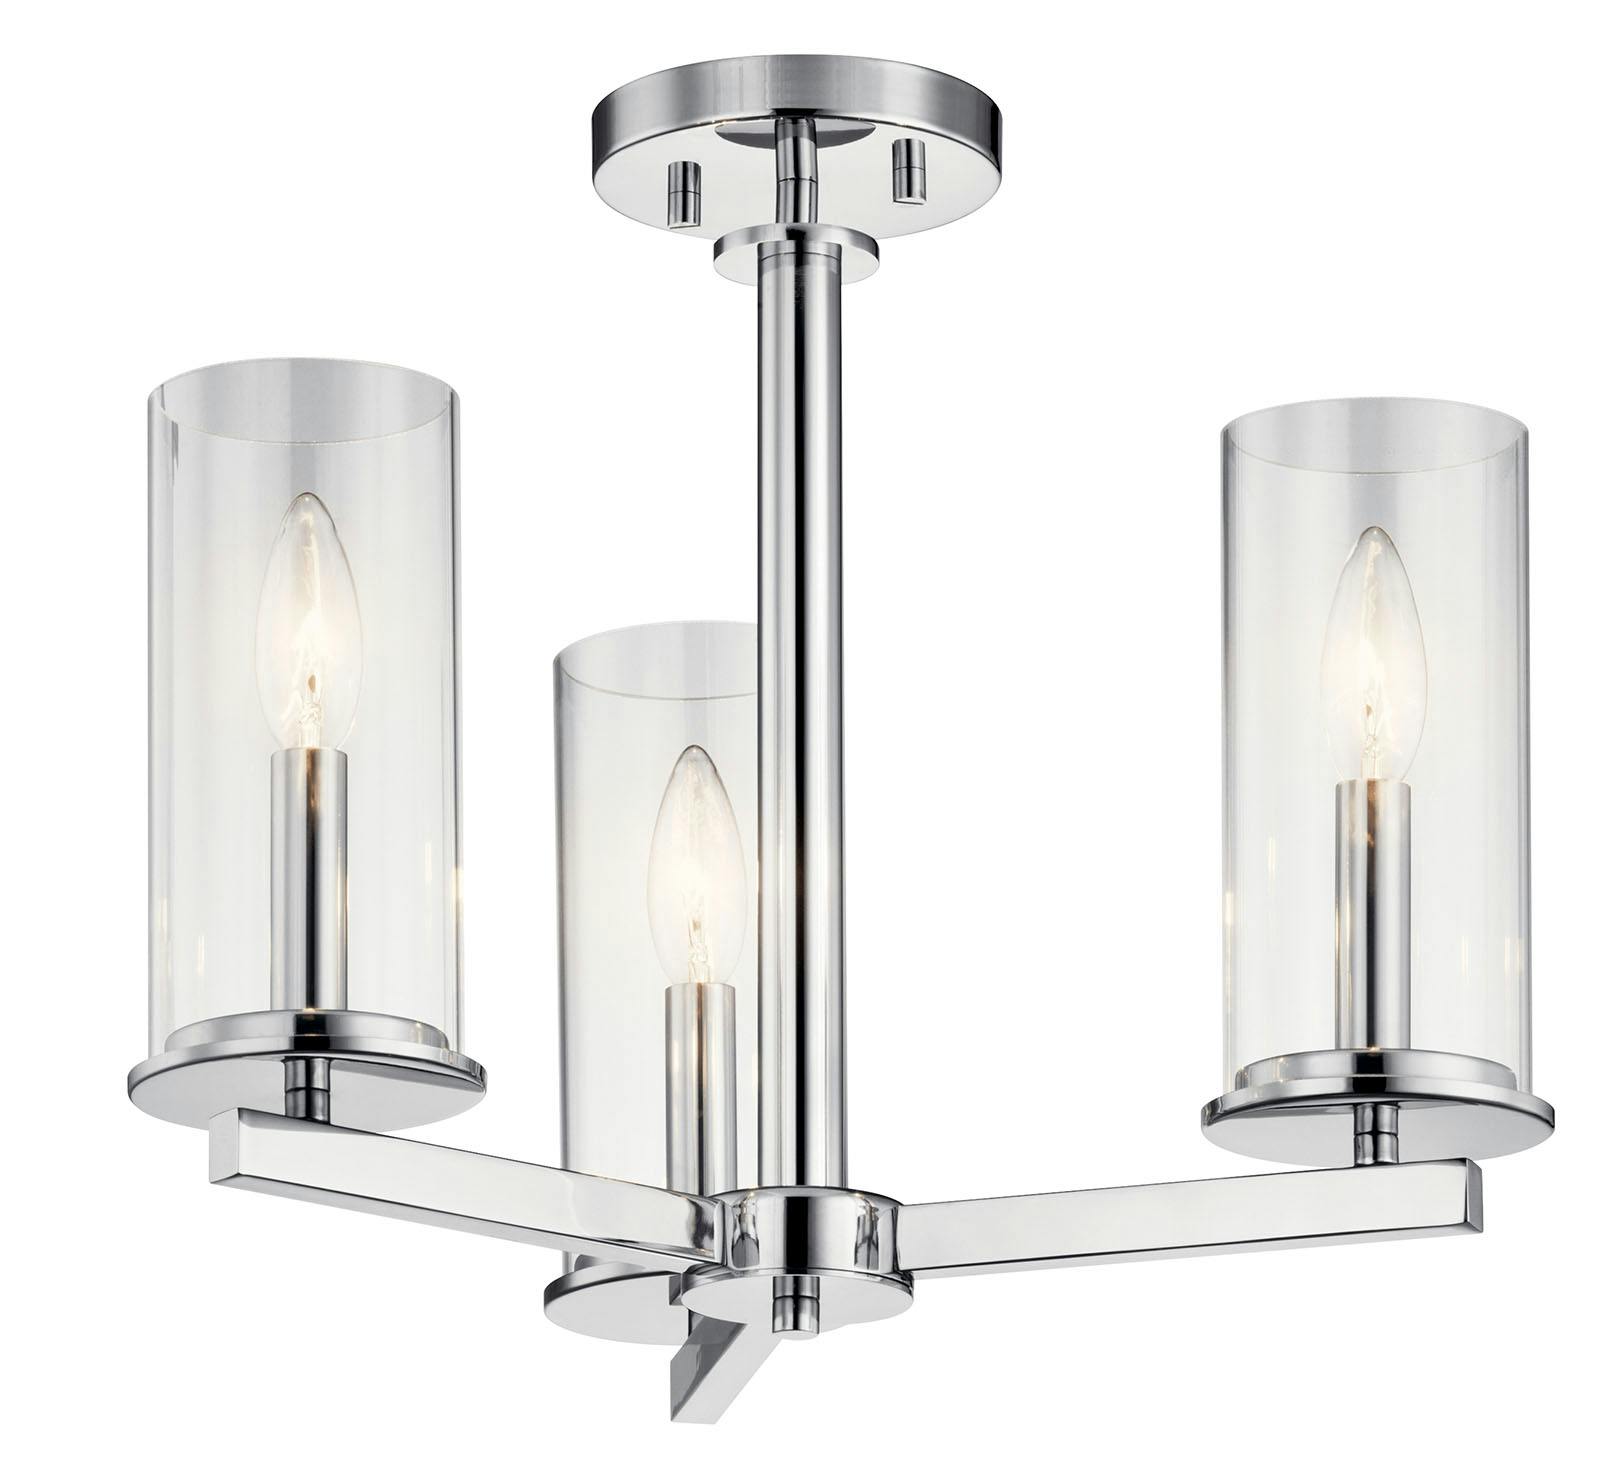 Product image of the 43997CH shown hung as a semi flush